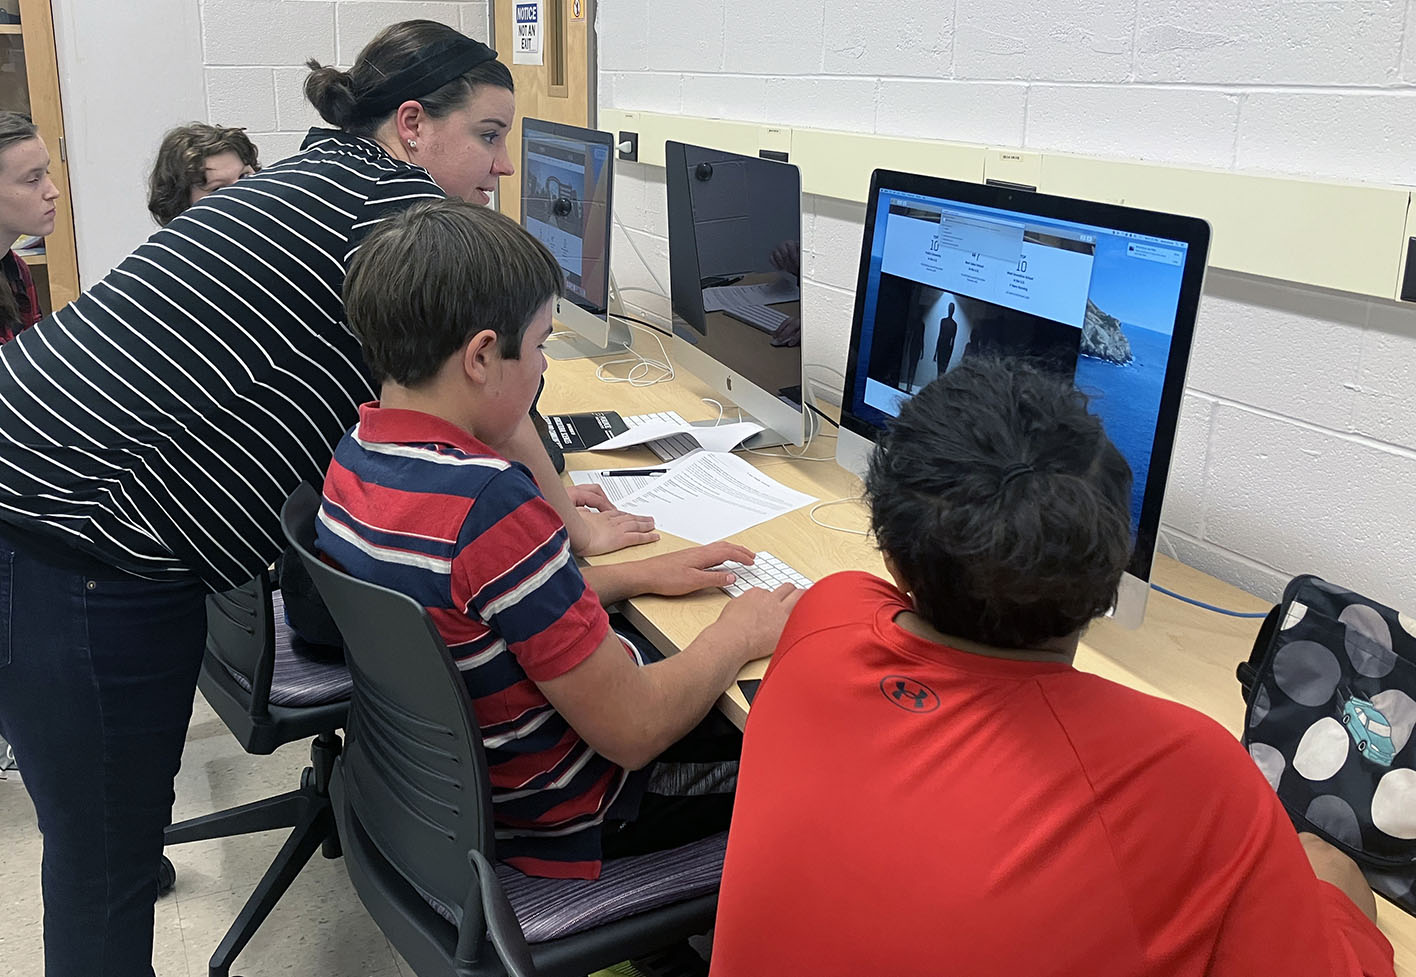 Students work in a computer lab